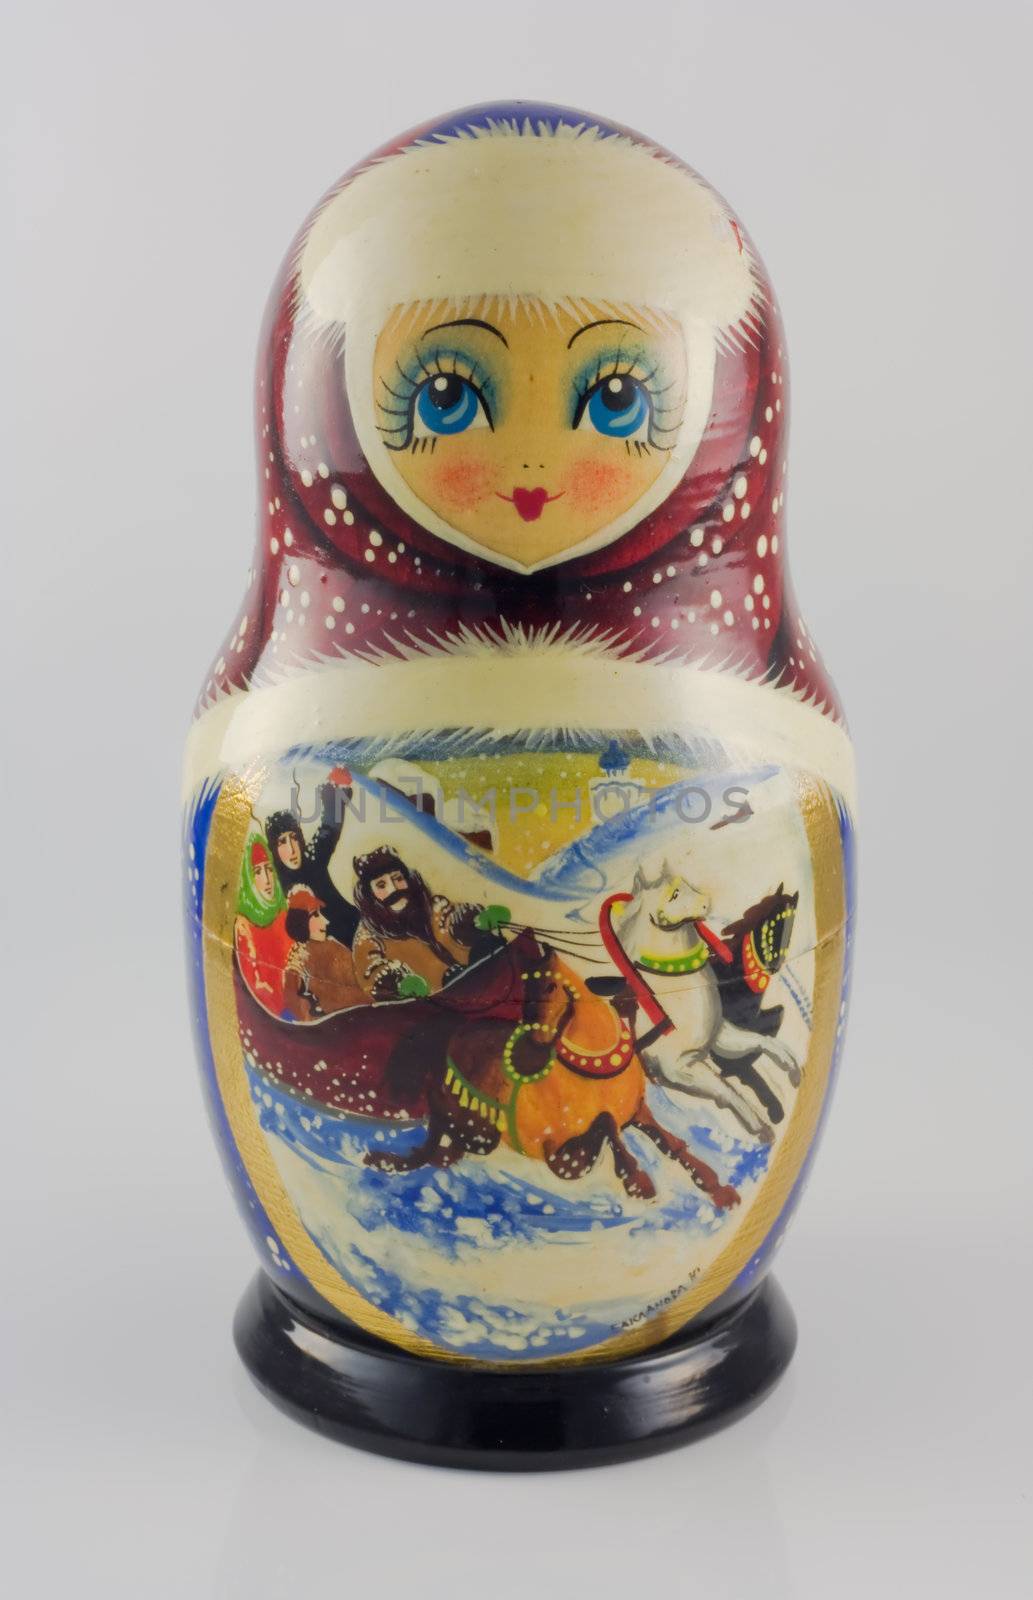 Handpainted Souvineer Doll from Russia
